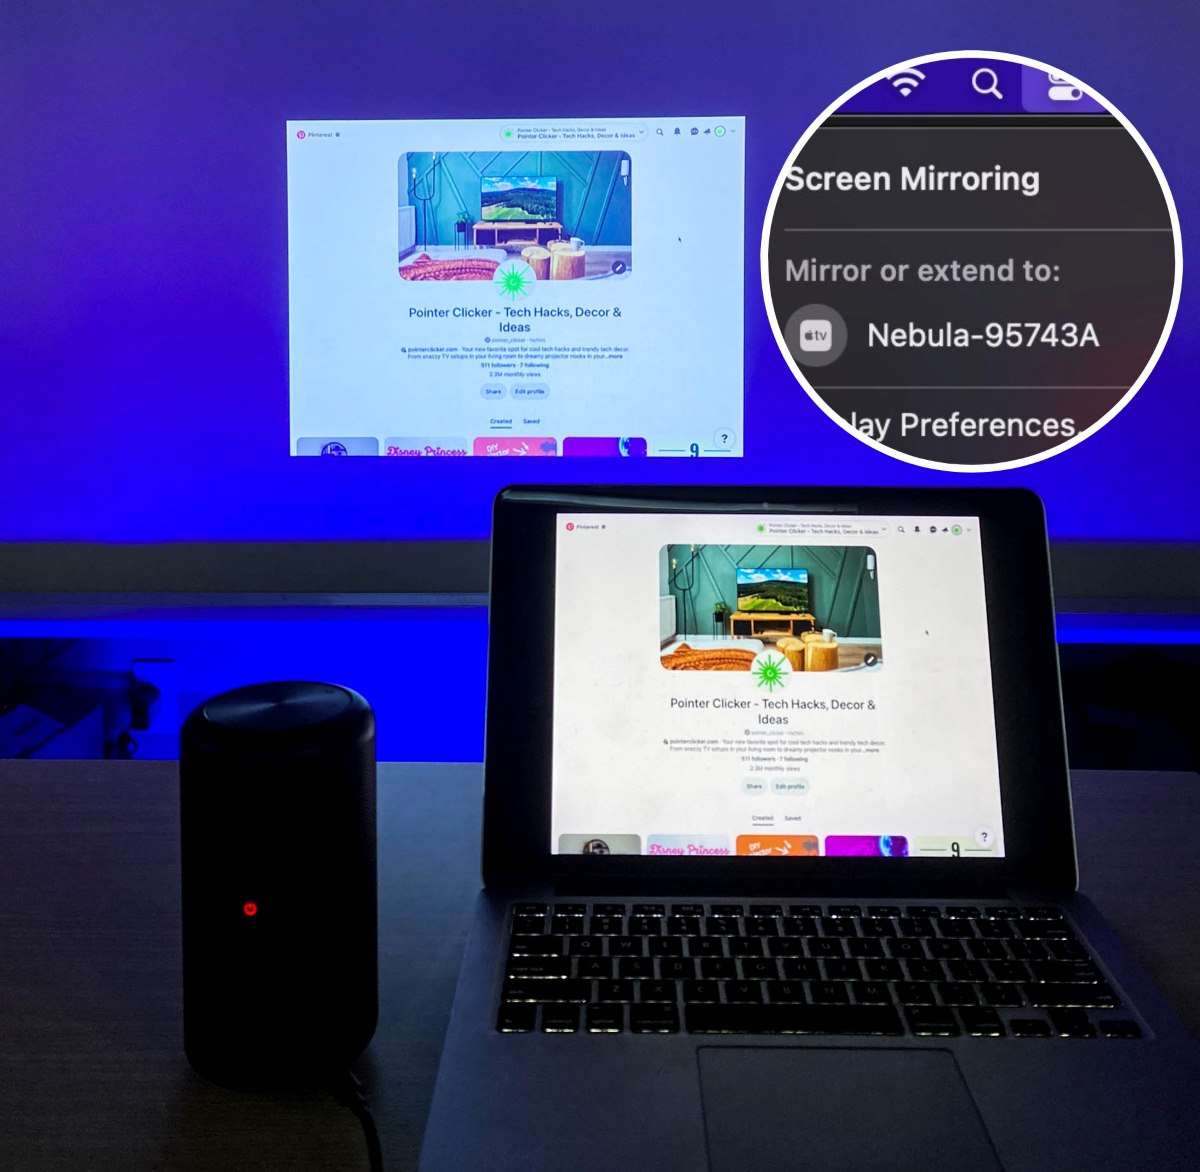 a Macbook is wirelessly cast on a Nebula projector with a highlighted Screen Mirroring